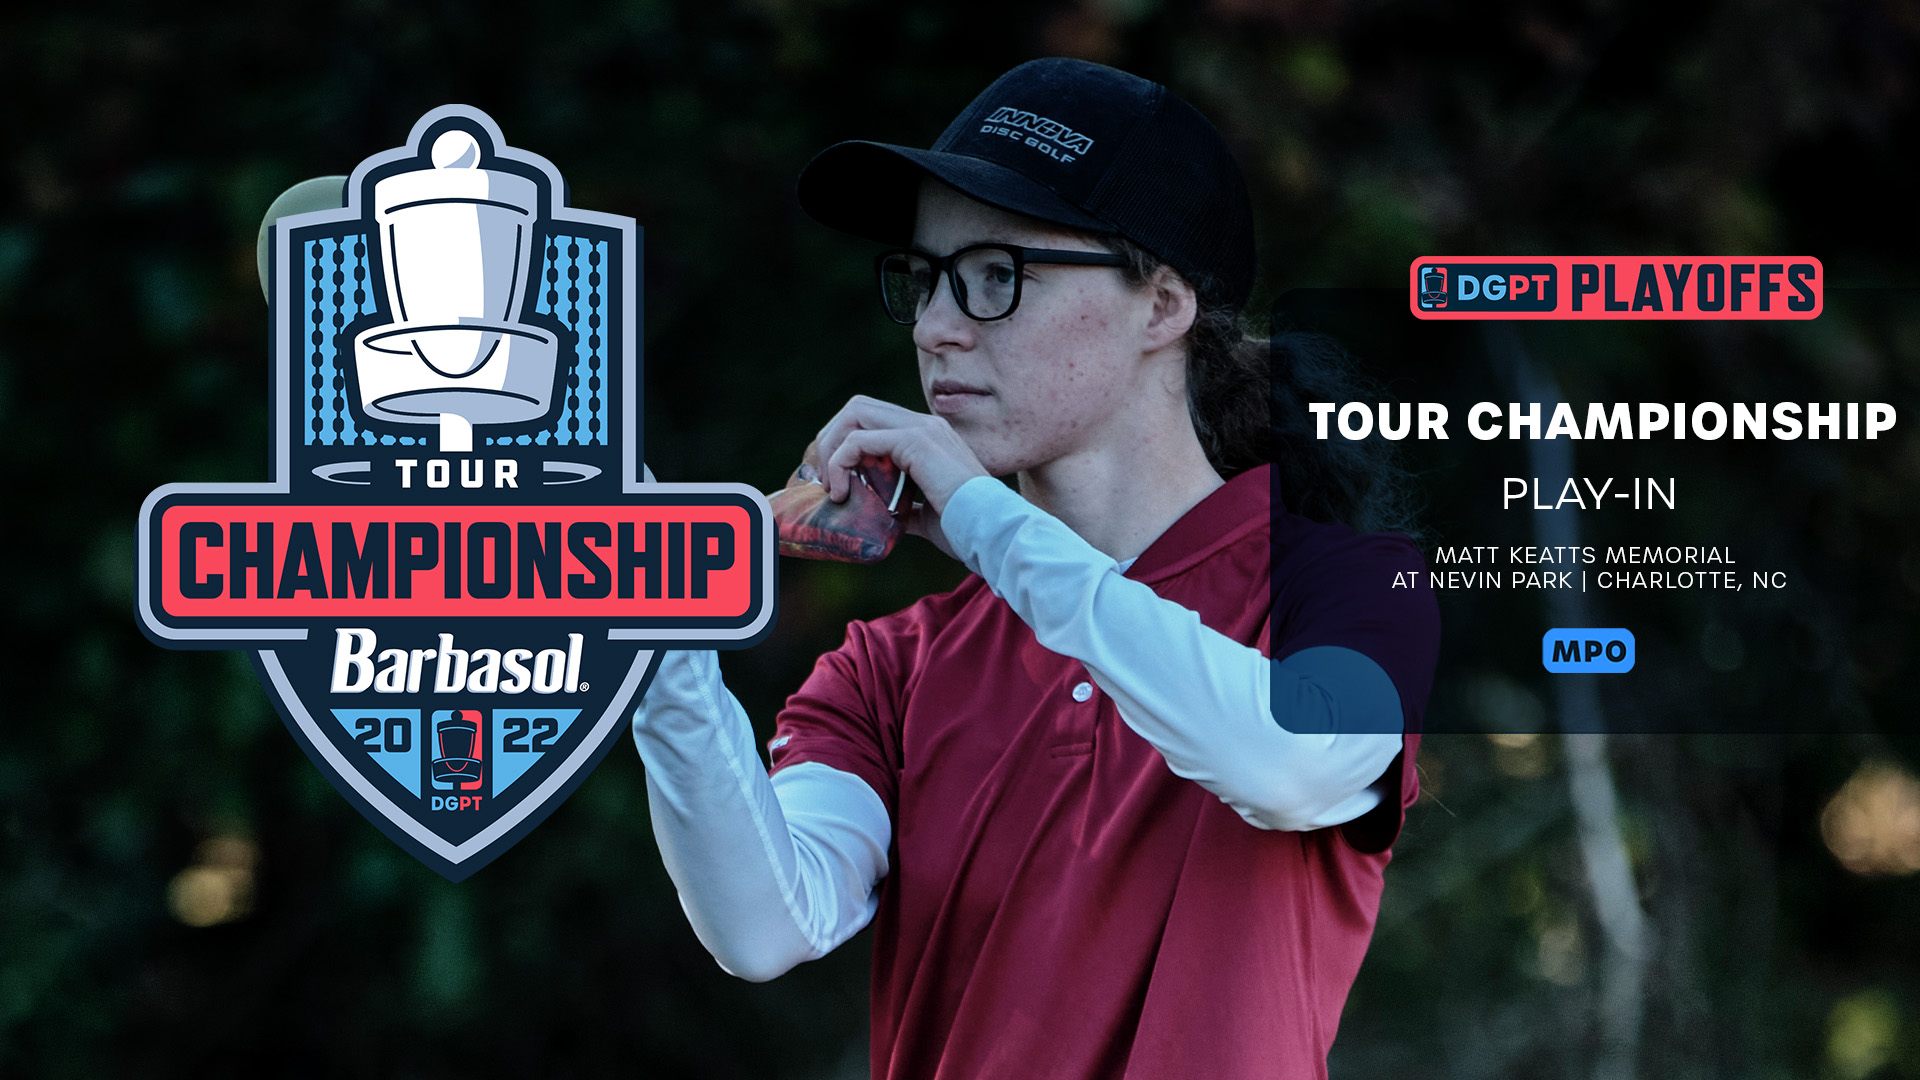 Play-In, FPO Tour Championship - 2022 Live Broadcasts